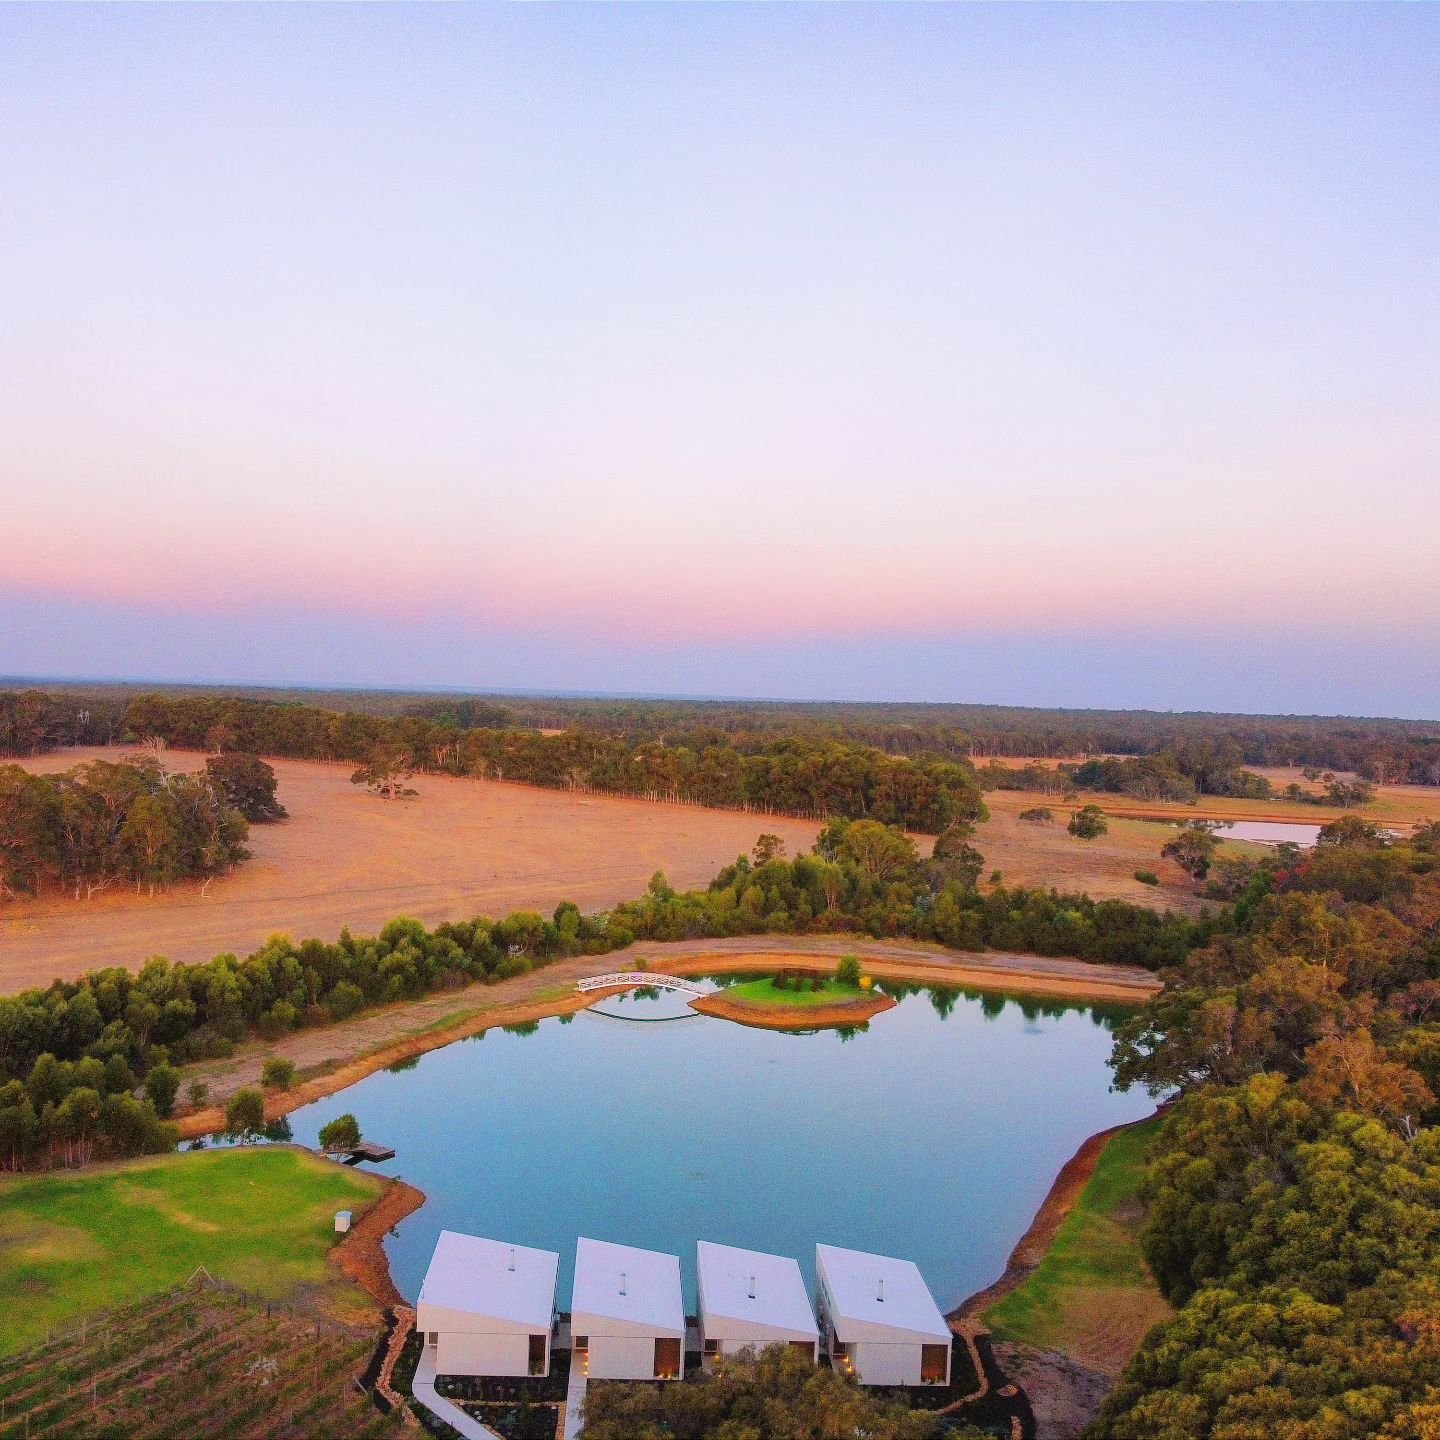 No need for TV when your accommodation view looks like this! Magic time at the villas✨ Last light casting beautiful colours across the sky and reflections on the lake. 

#holidayaccommodation #EdgeLuxuryVillas #margaretriveraccommodation #Yallingup #